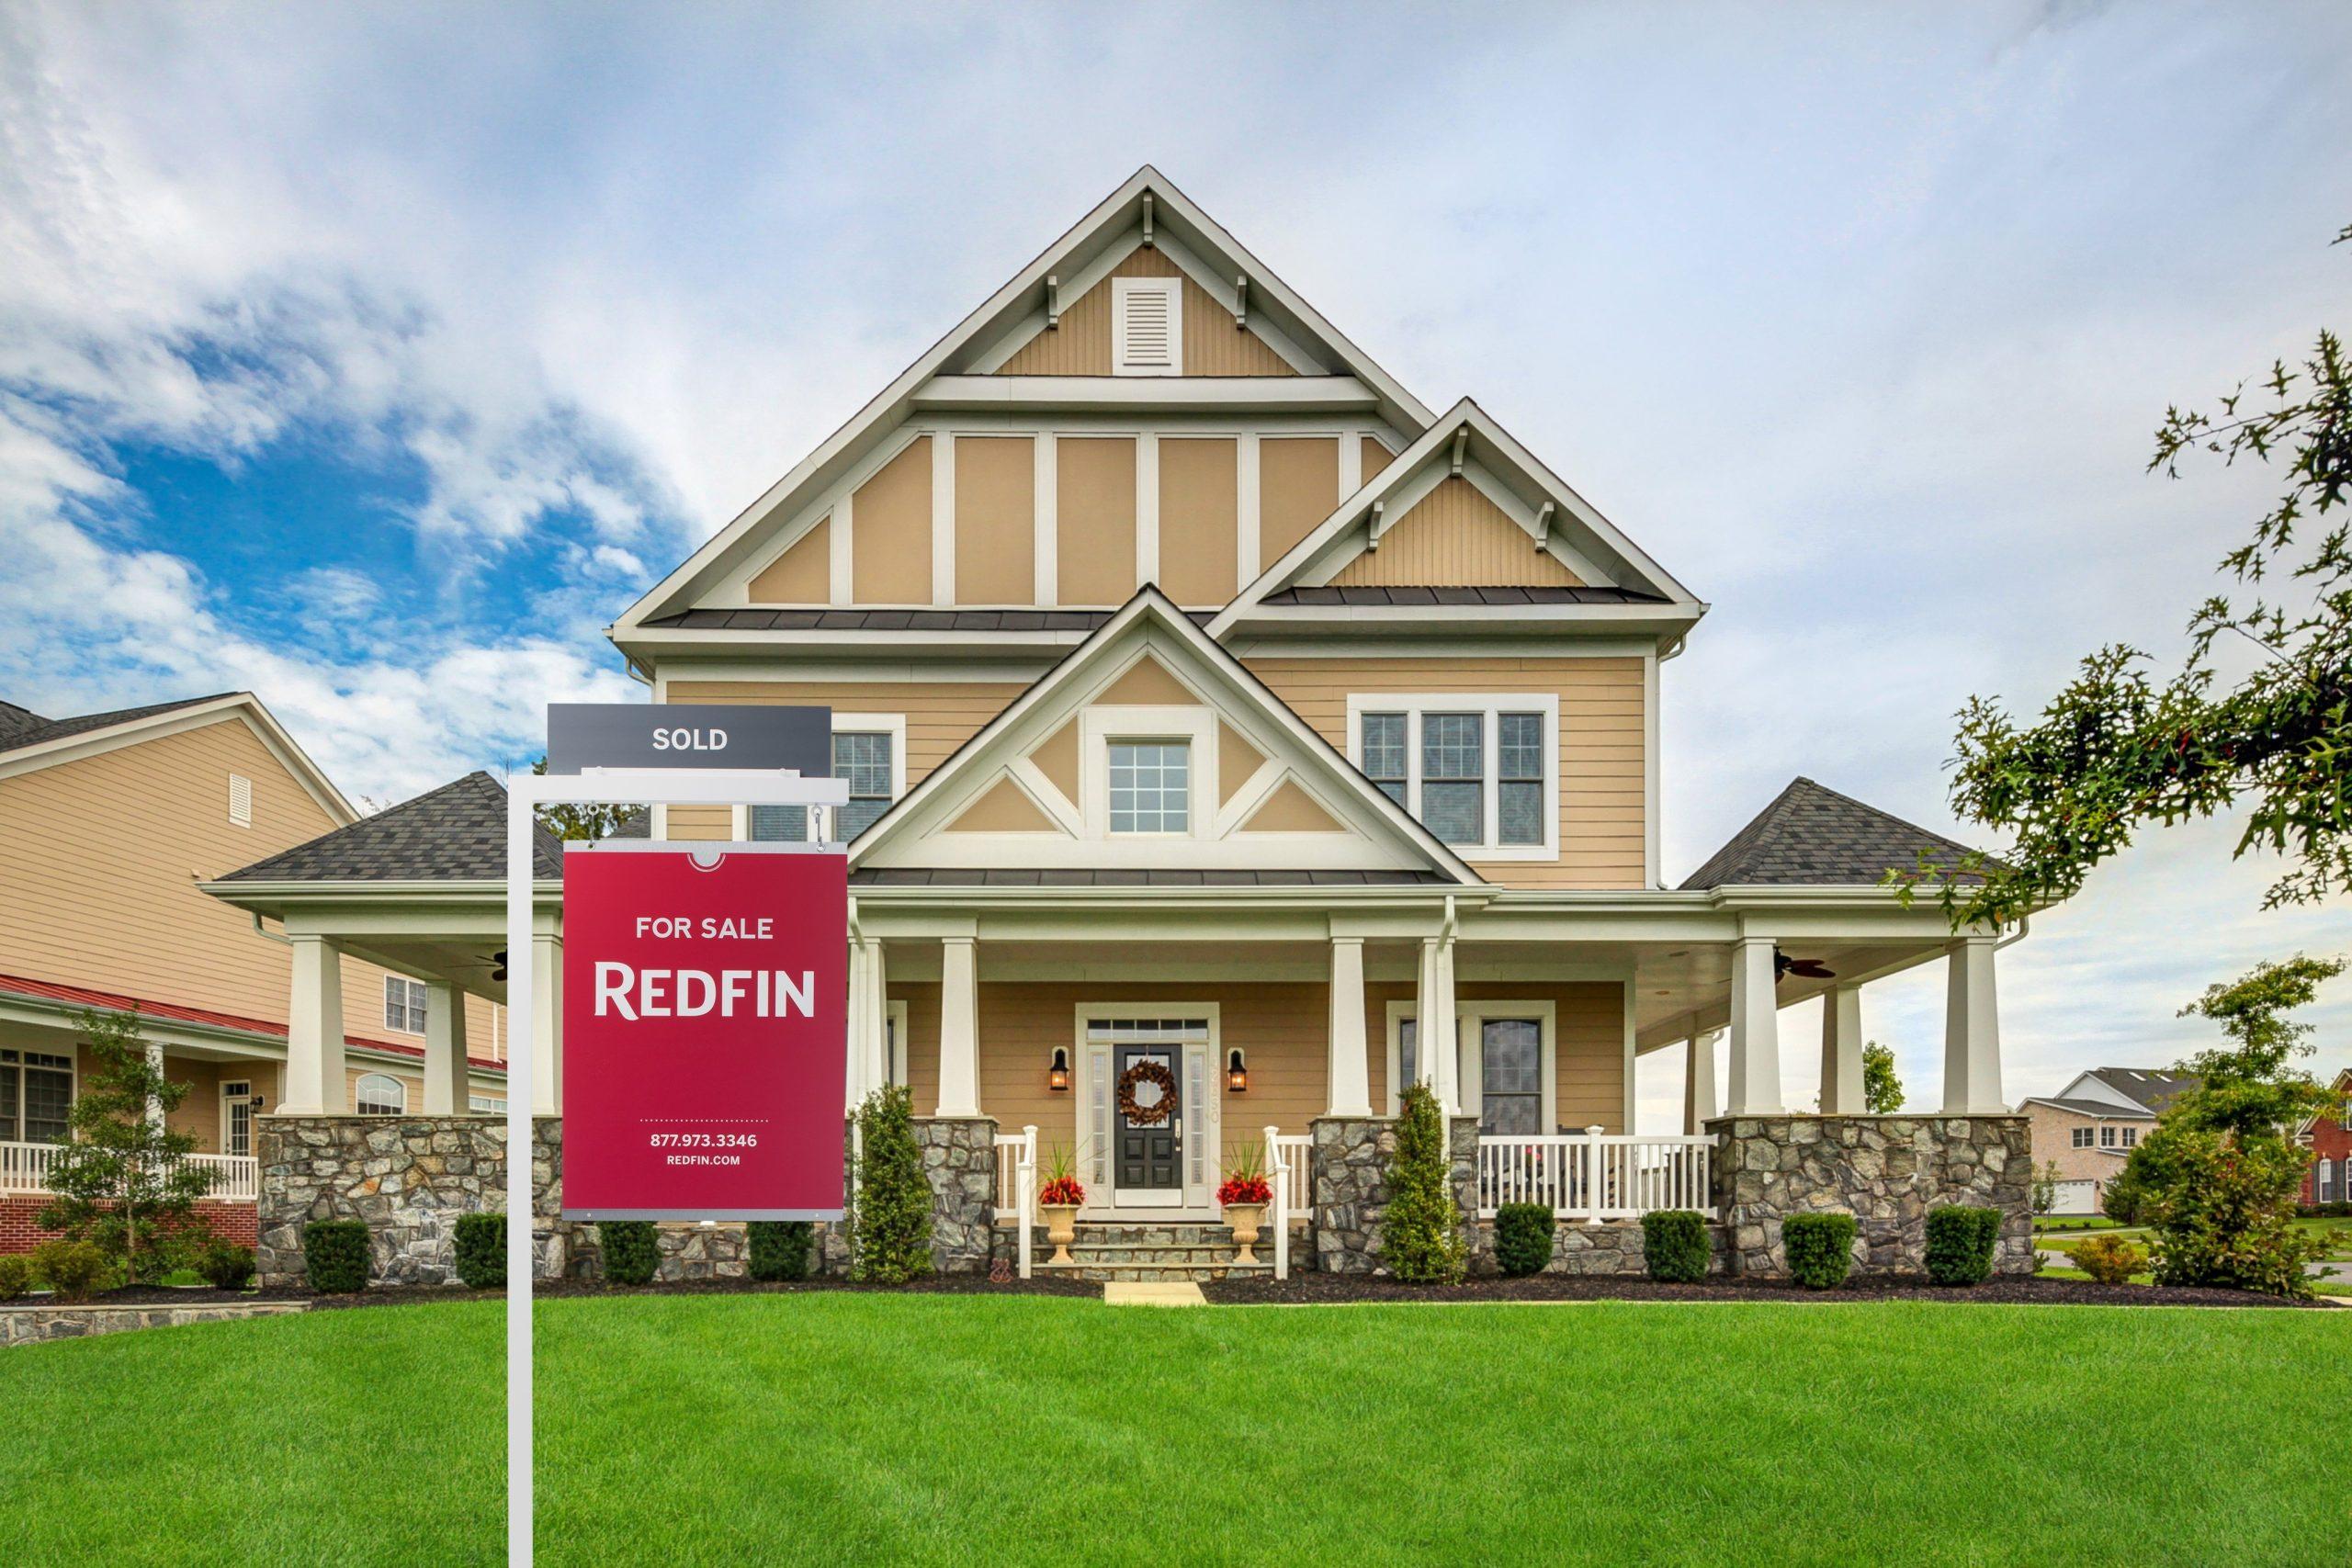 Who is redfin real estate